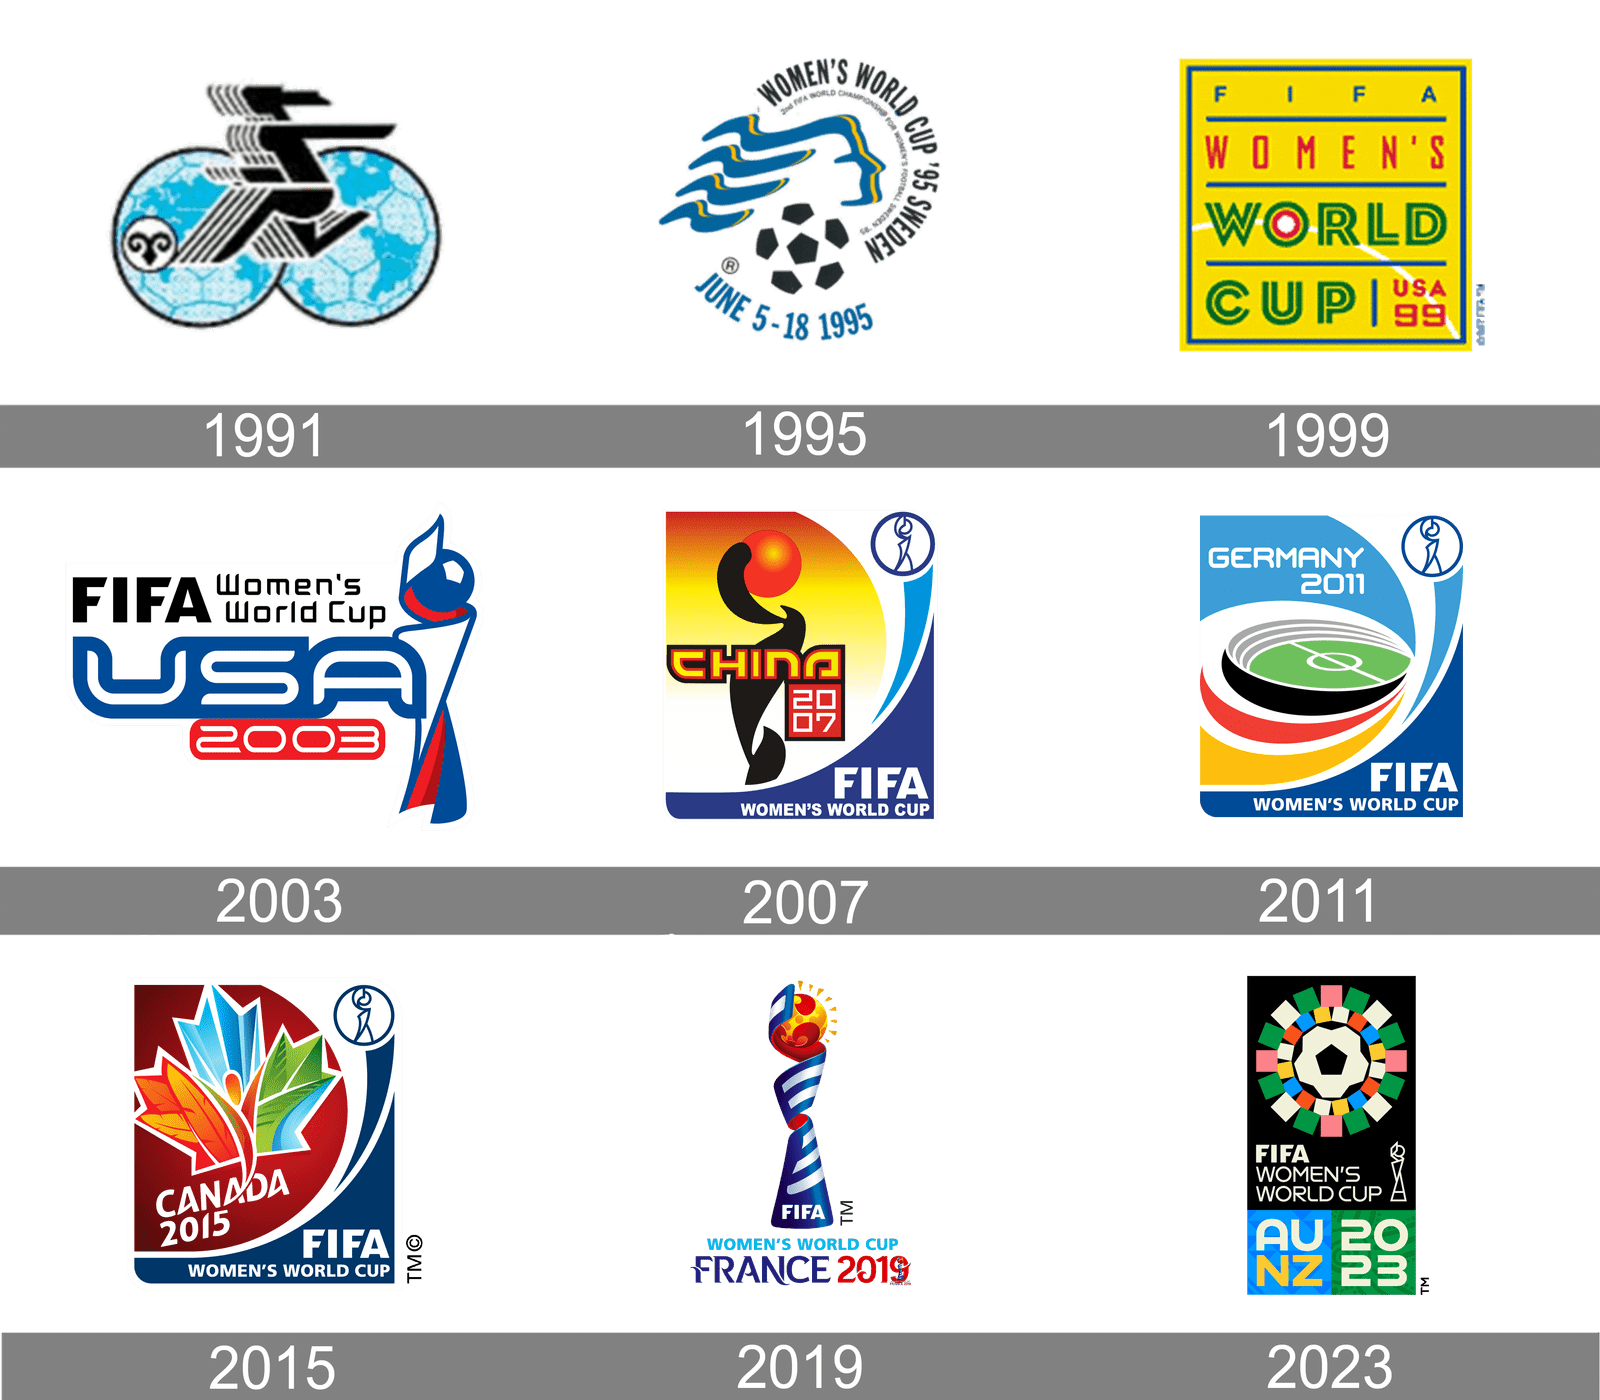 fifa-women-s-world-cup-logo-history-and-winning-stats-games-fun-facts